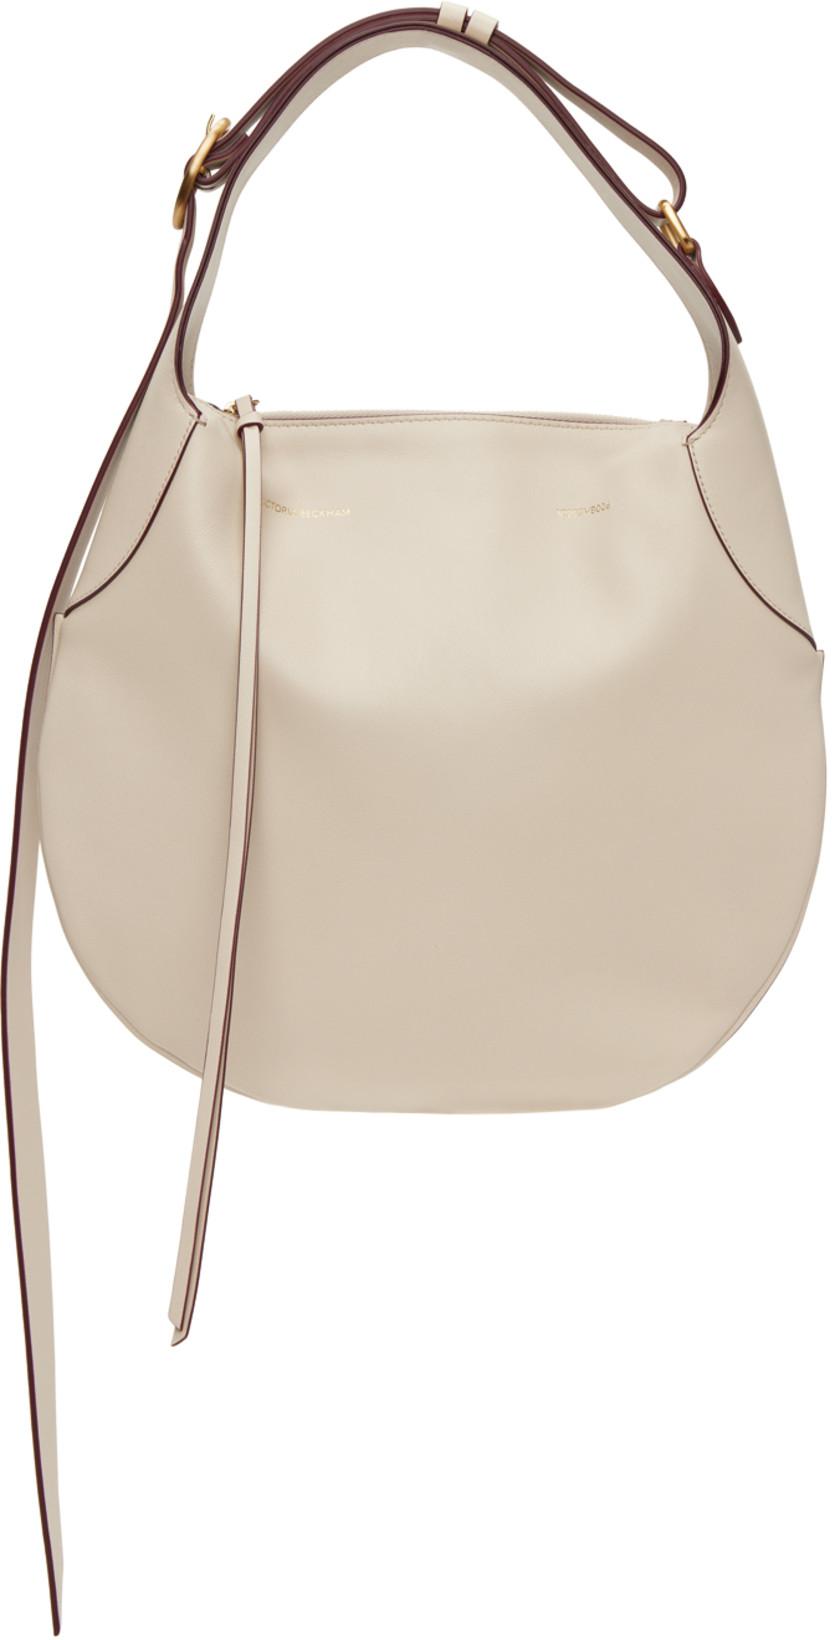 Off-White Small Half Moon Bag by VICTORIA BECKHAM